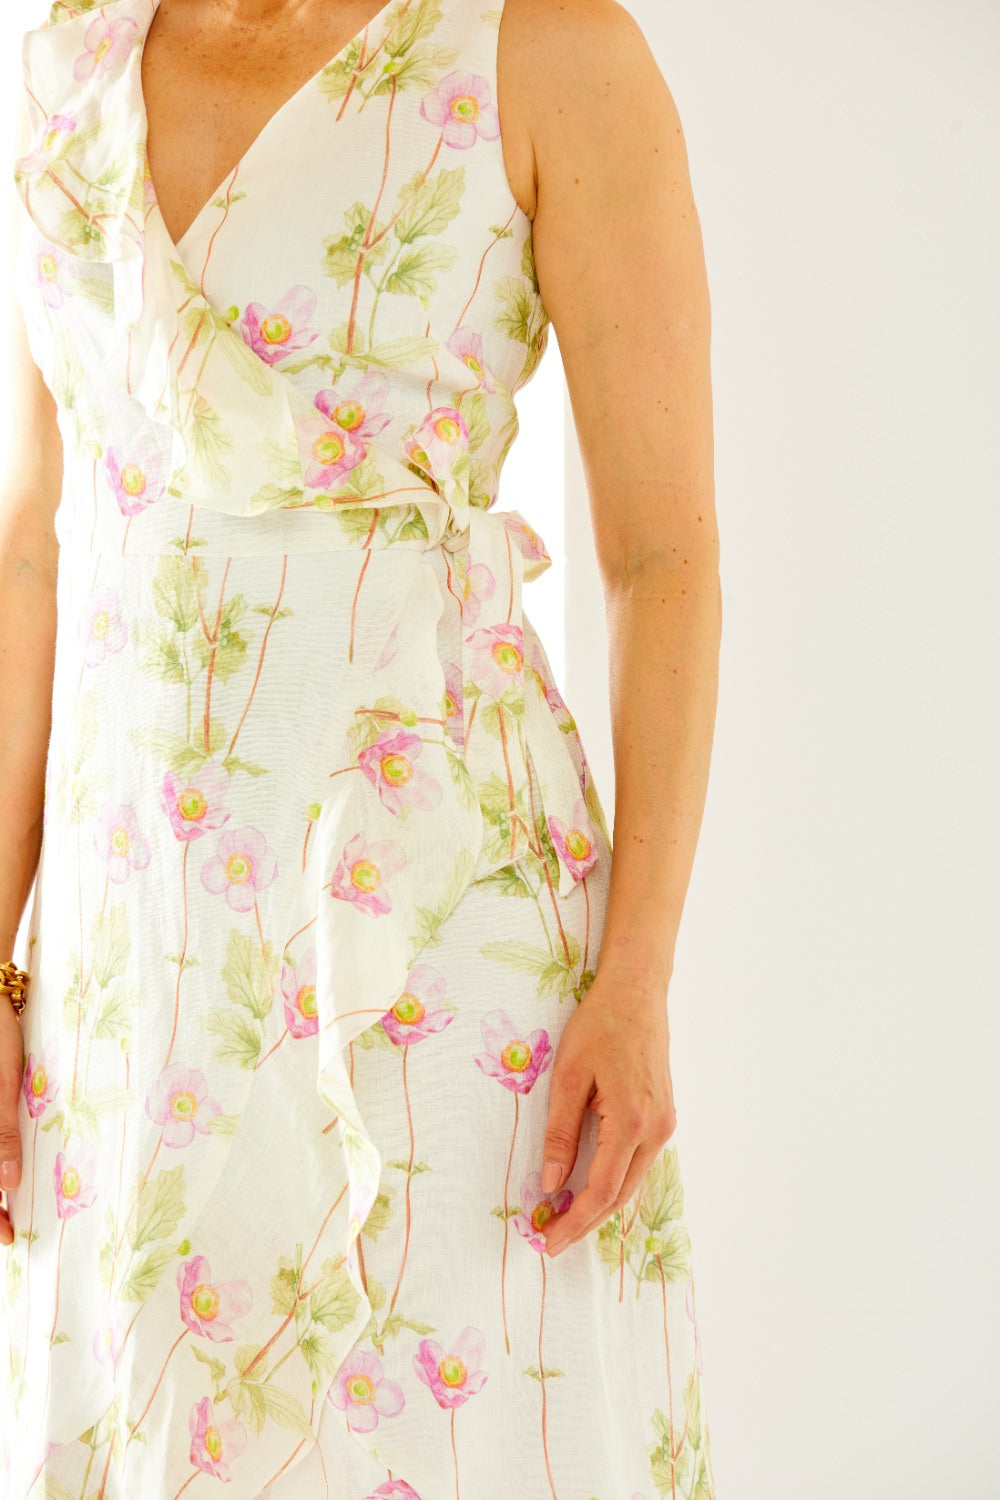 Woman in floral wrap dress